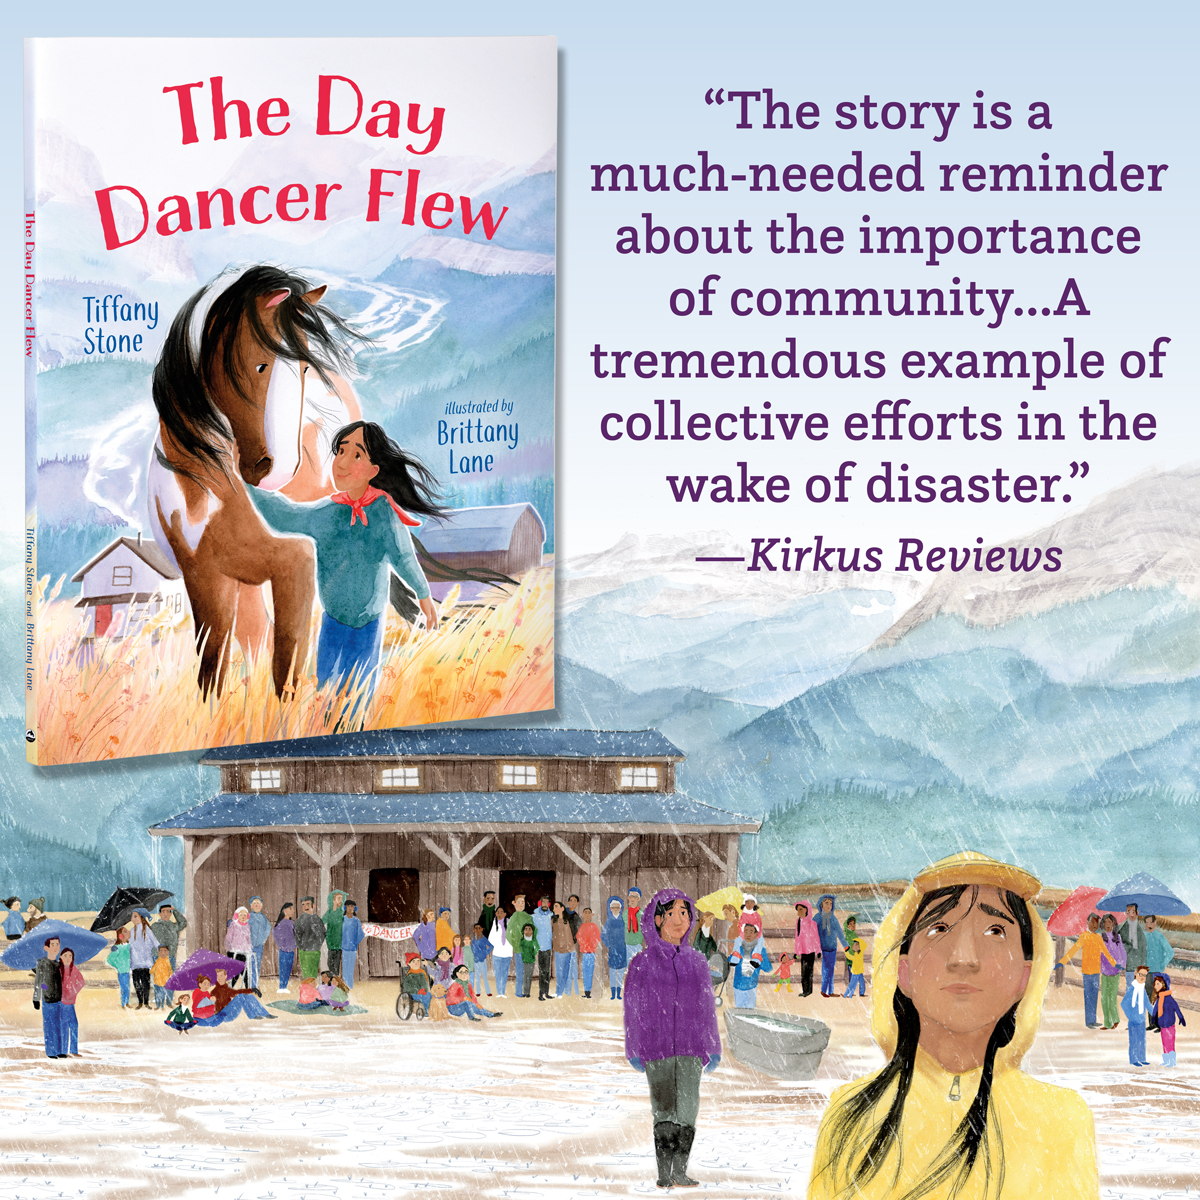 “A tremendous example of collective efforts in the wake of disaster.” —Kirkus Reviews on THE DAY DANCER FLEW. Learn more: orcabook.com/The-Day-Dancer…